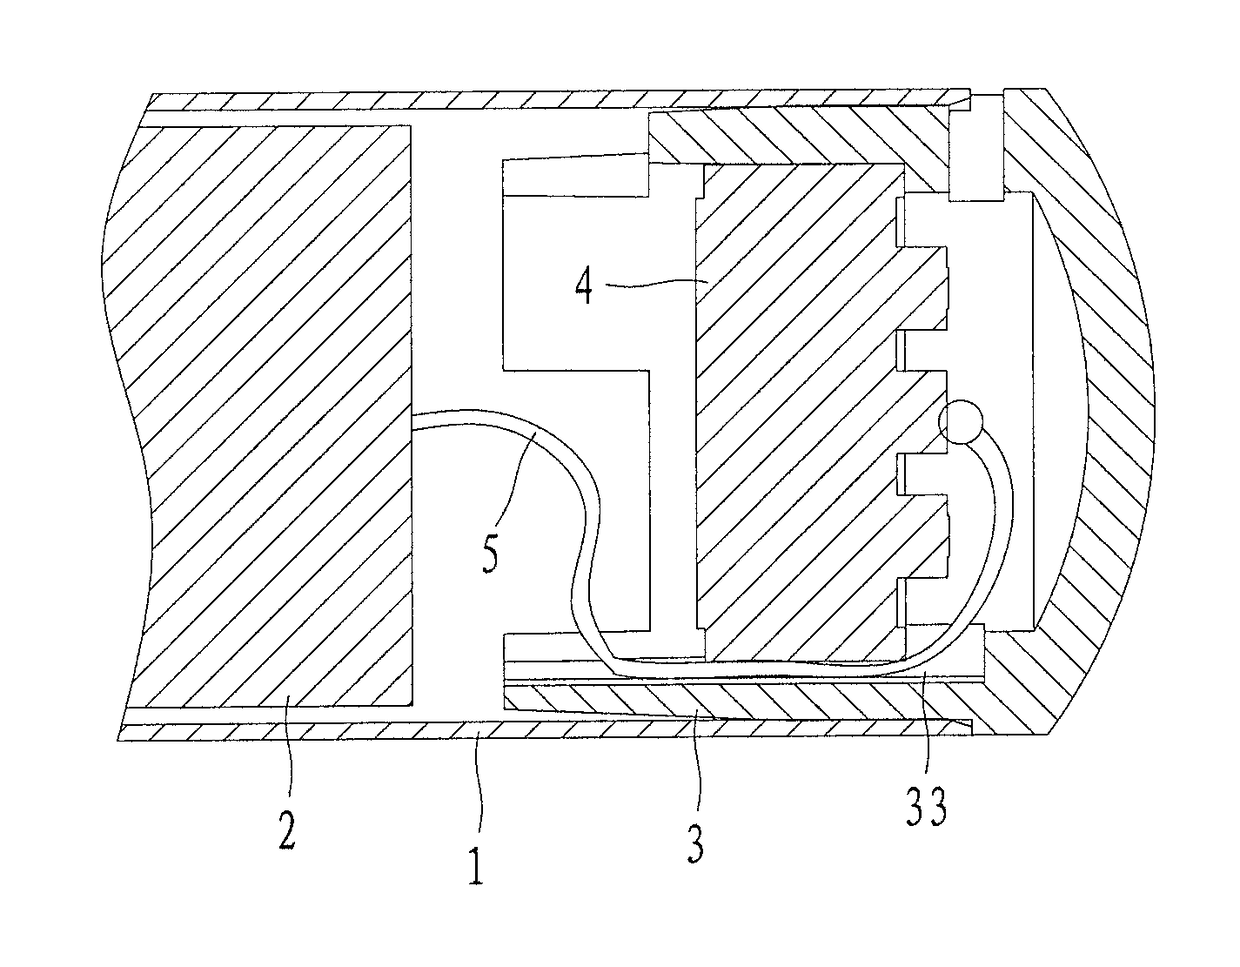 Battery assembly, electronic cigarette, and method for assembling the battery assembly